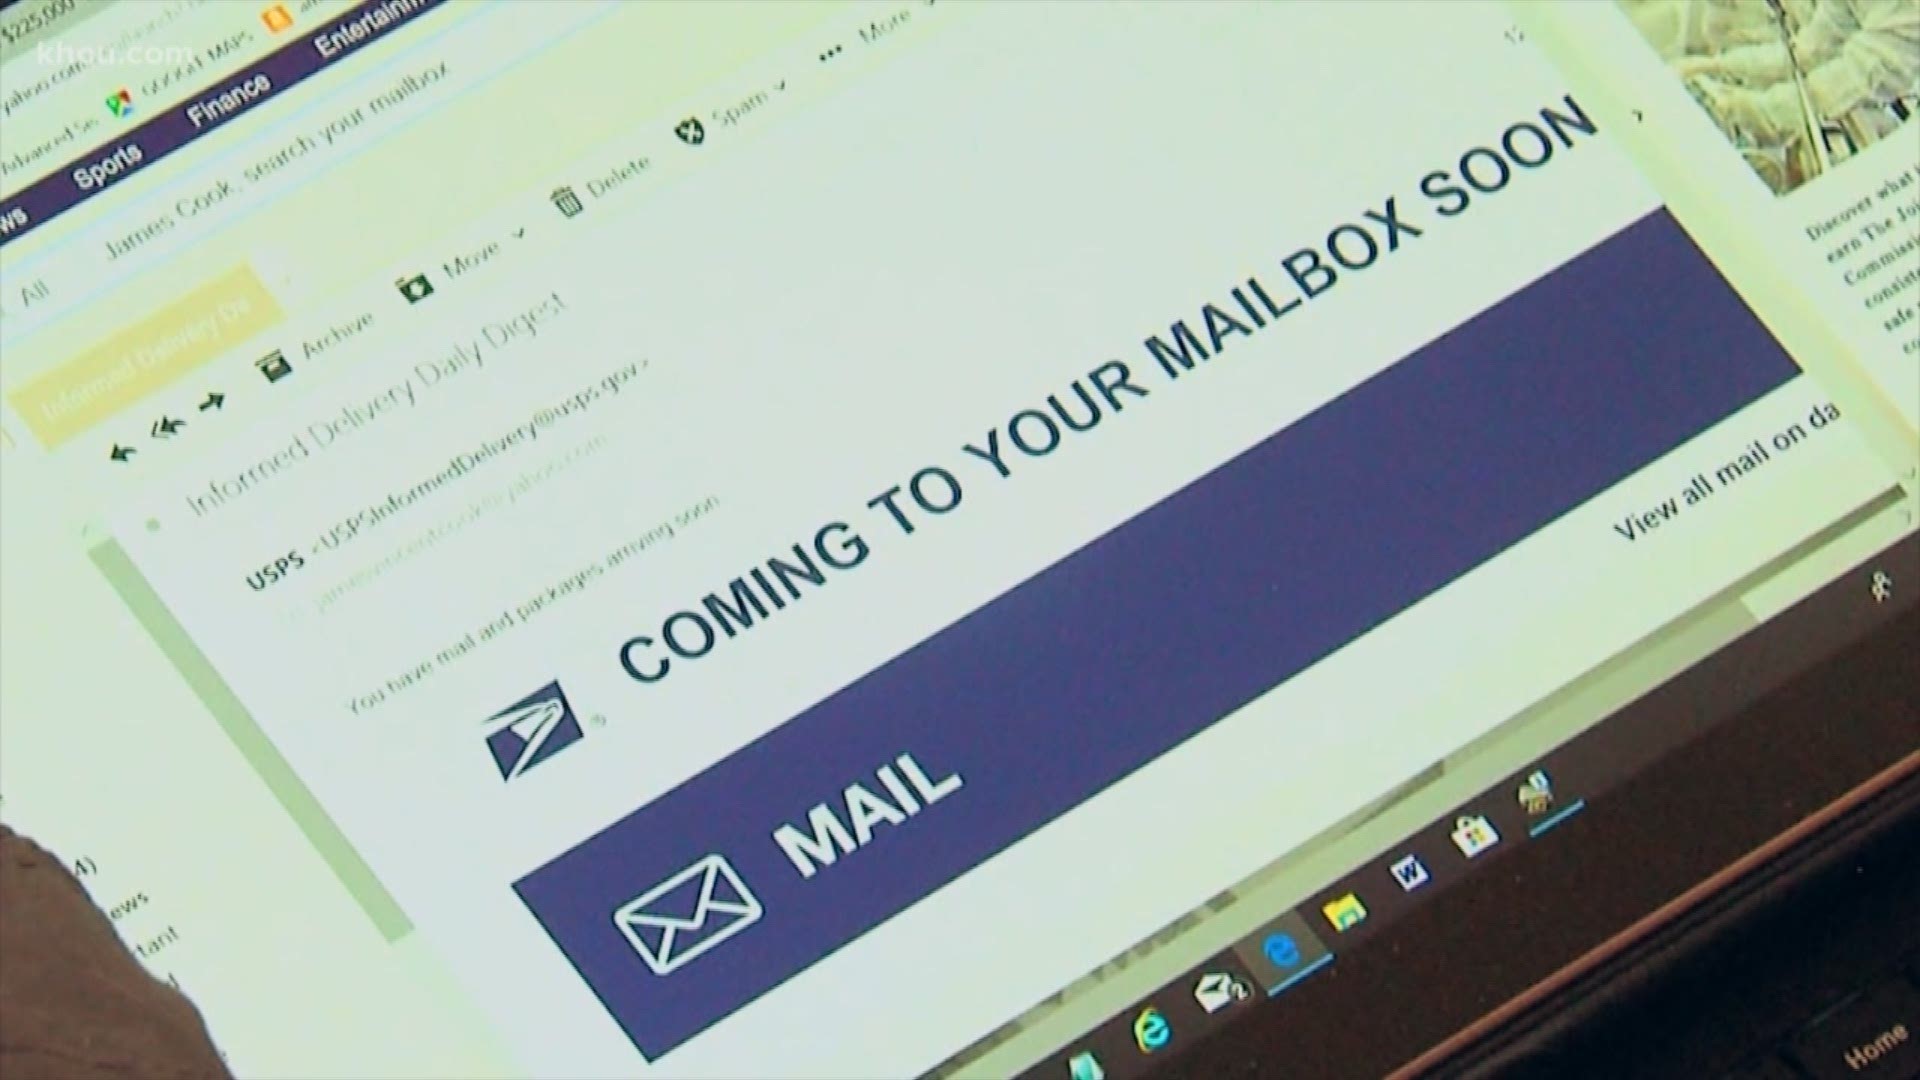 A new feature designed to prevent mail theft may actually be causing it in some cases. Consumer reporter John Matarese shows us how savvy criminals are using a new postal service to grab your mail.